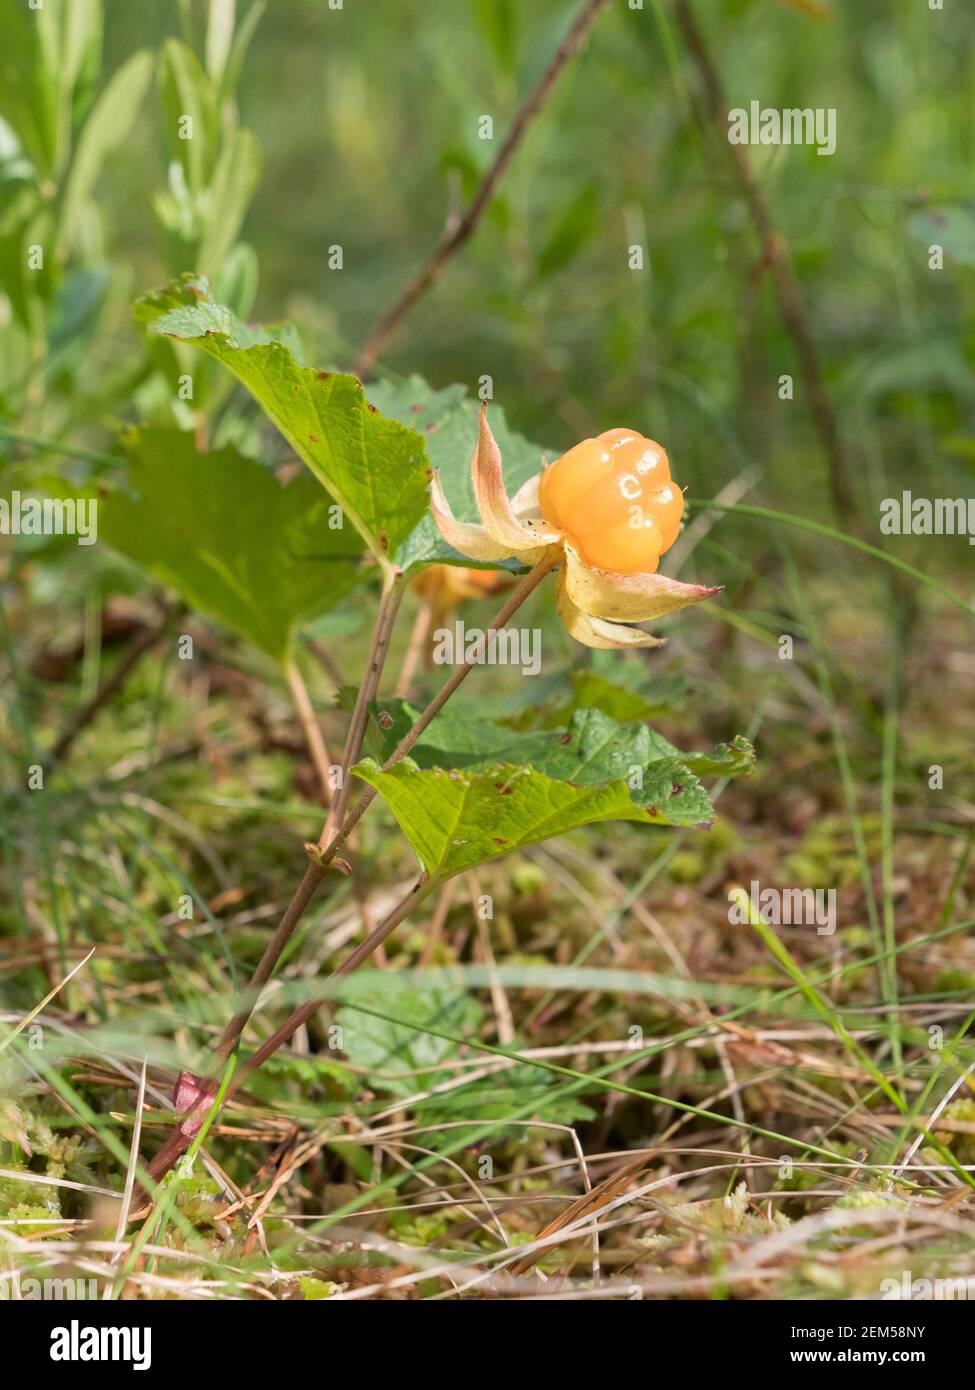 Cloudberry with ripe fruit in wetland forest Stock Photo